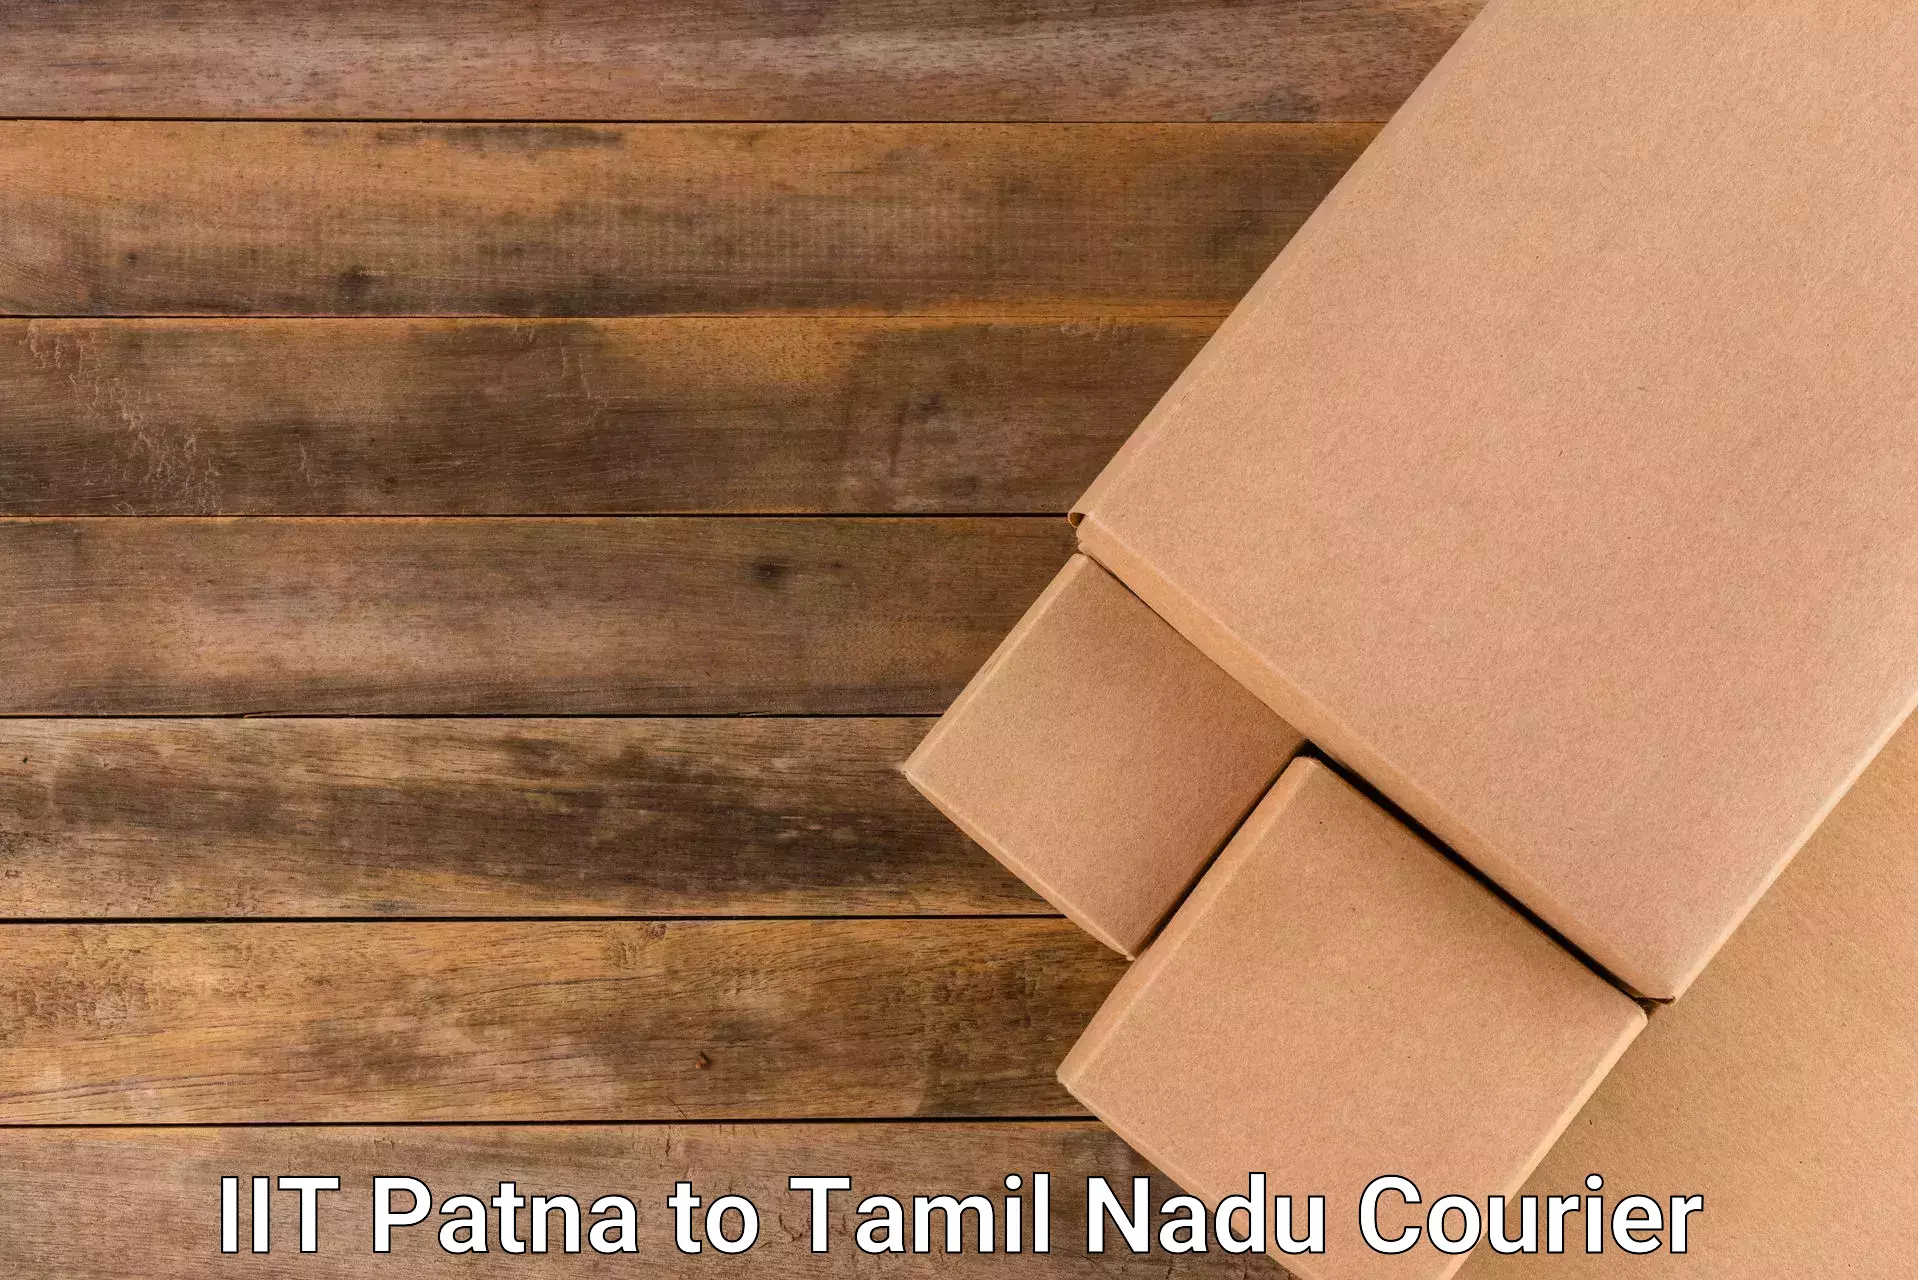 Same-day delivery options in IIT Patna to Tamil Nadu